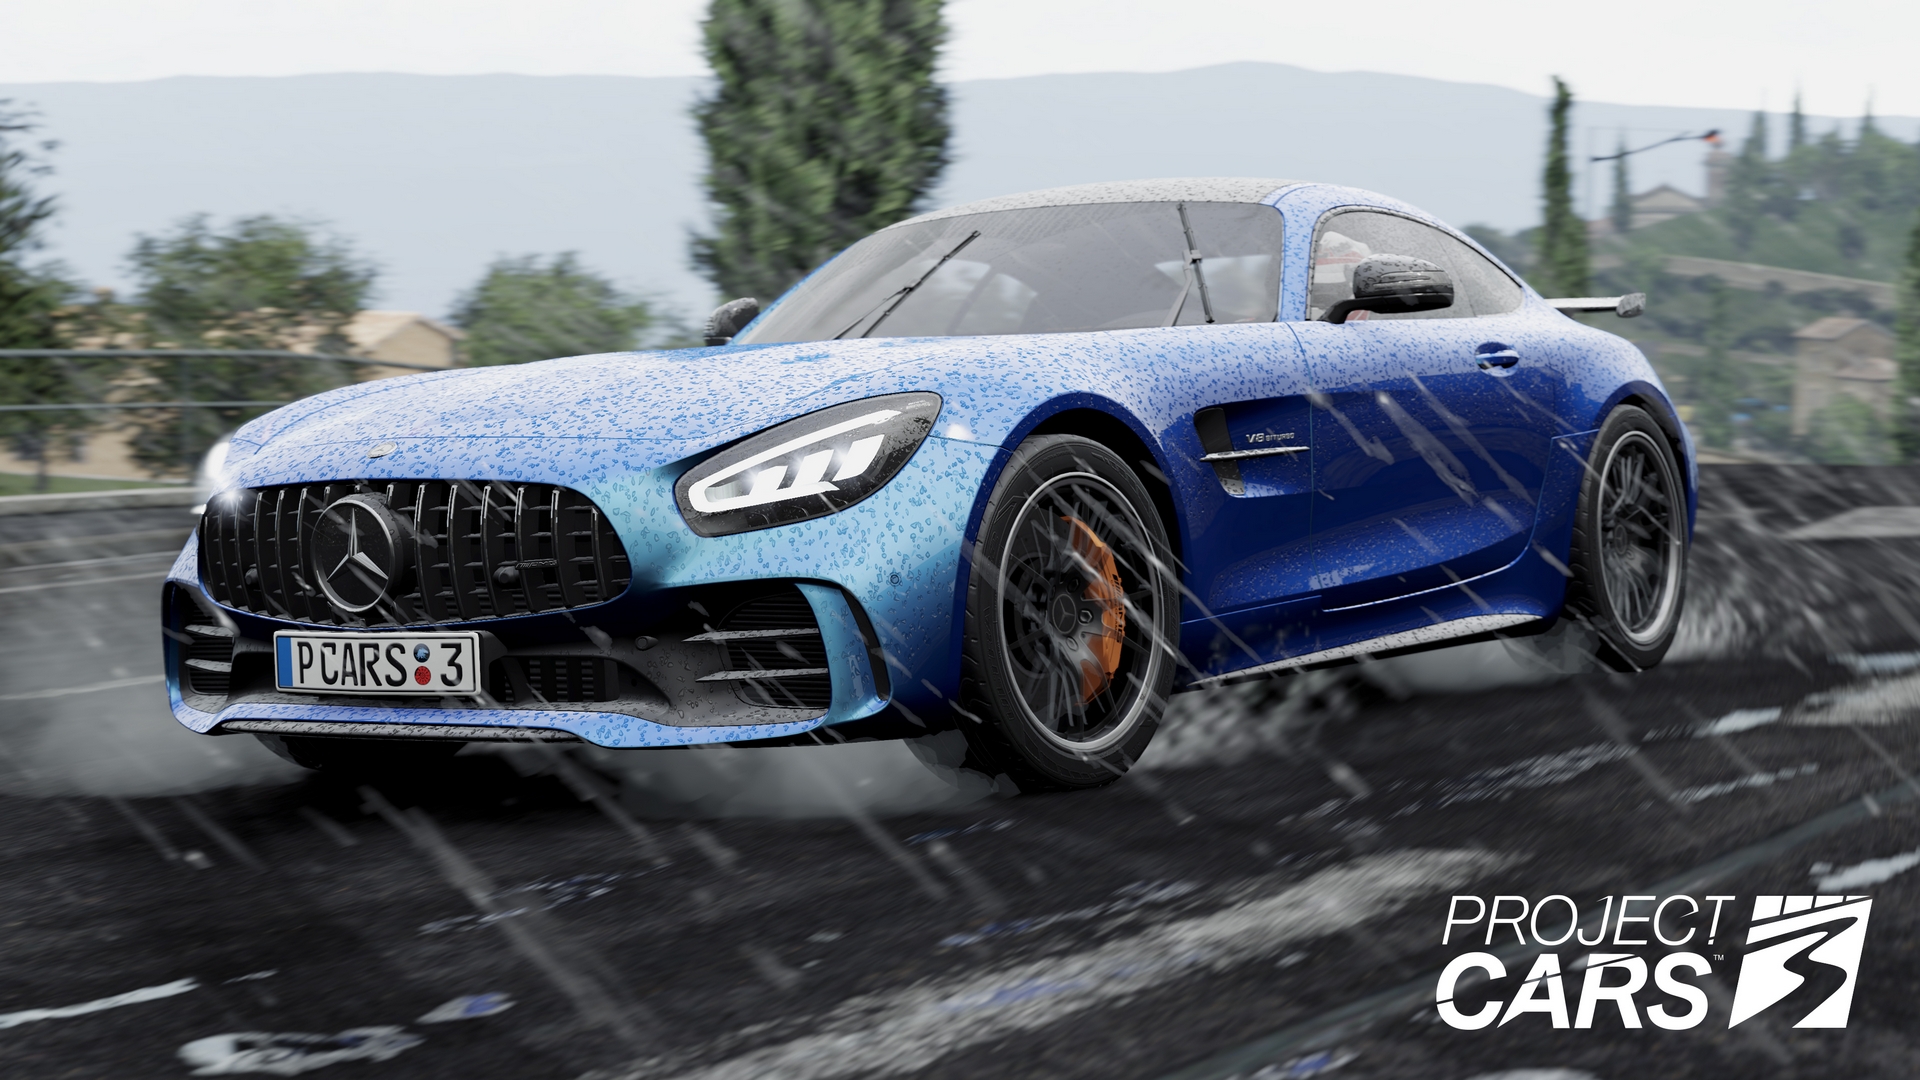 Project Cars 3 data